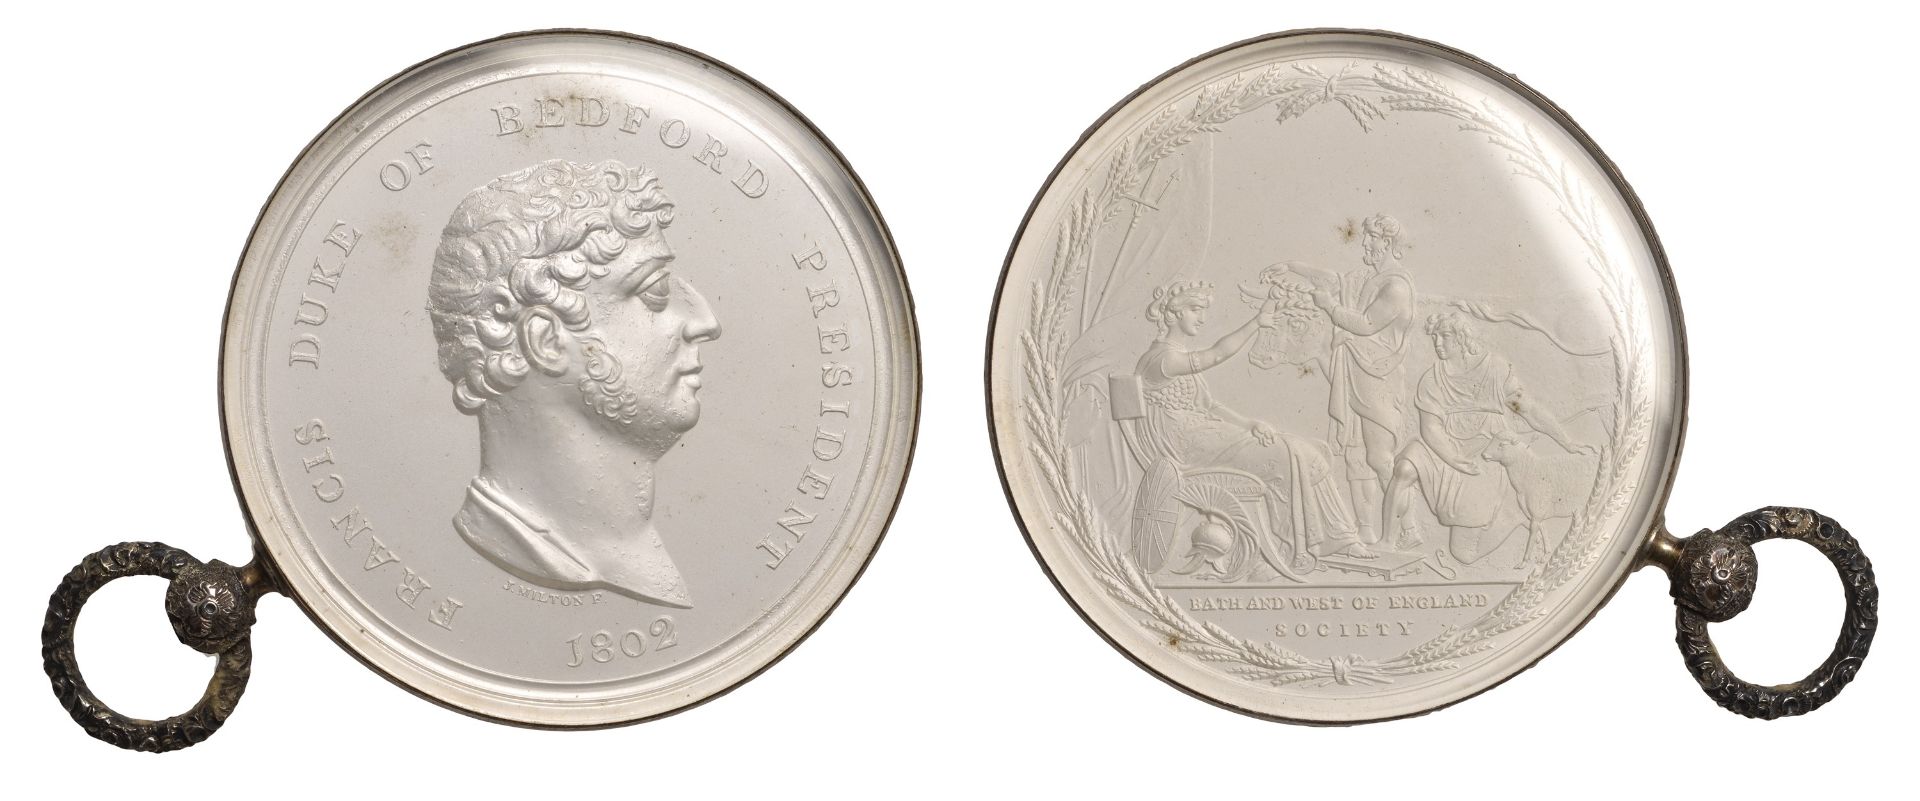 Bath and West of England Society, a glazed silver medal by J. Milton, bust of the Duke of Be...